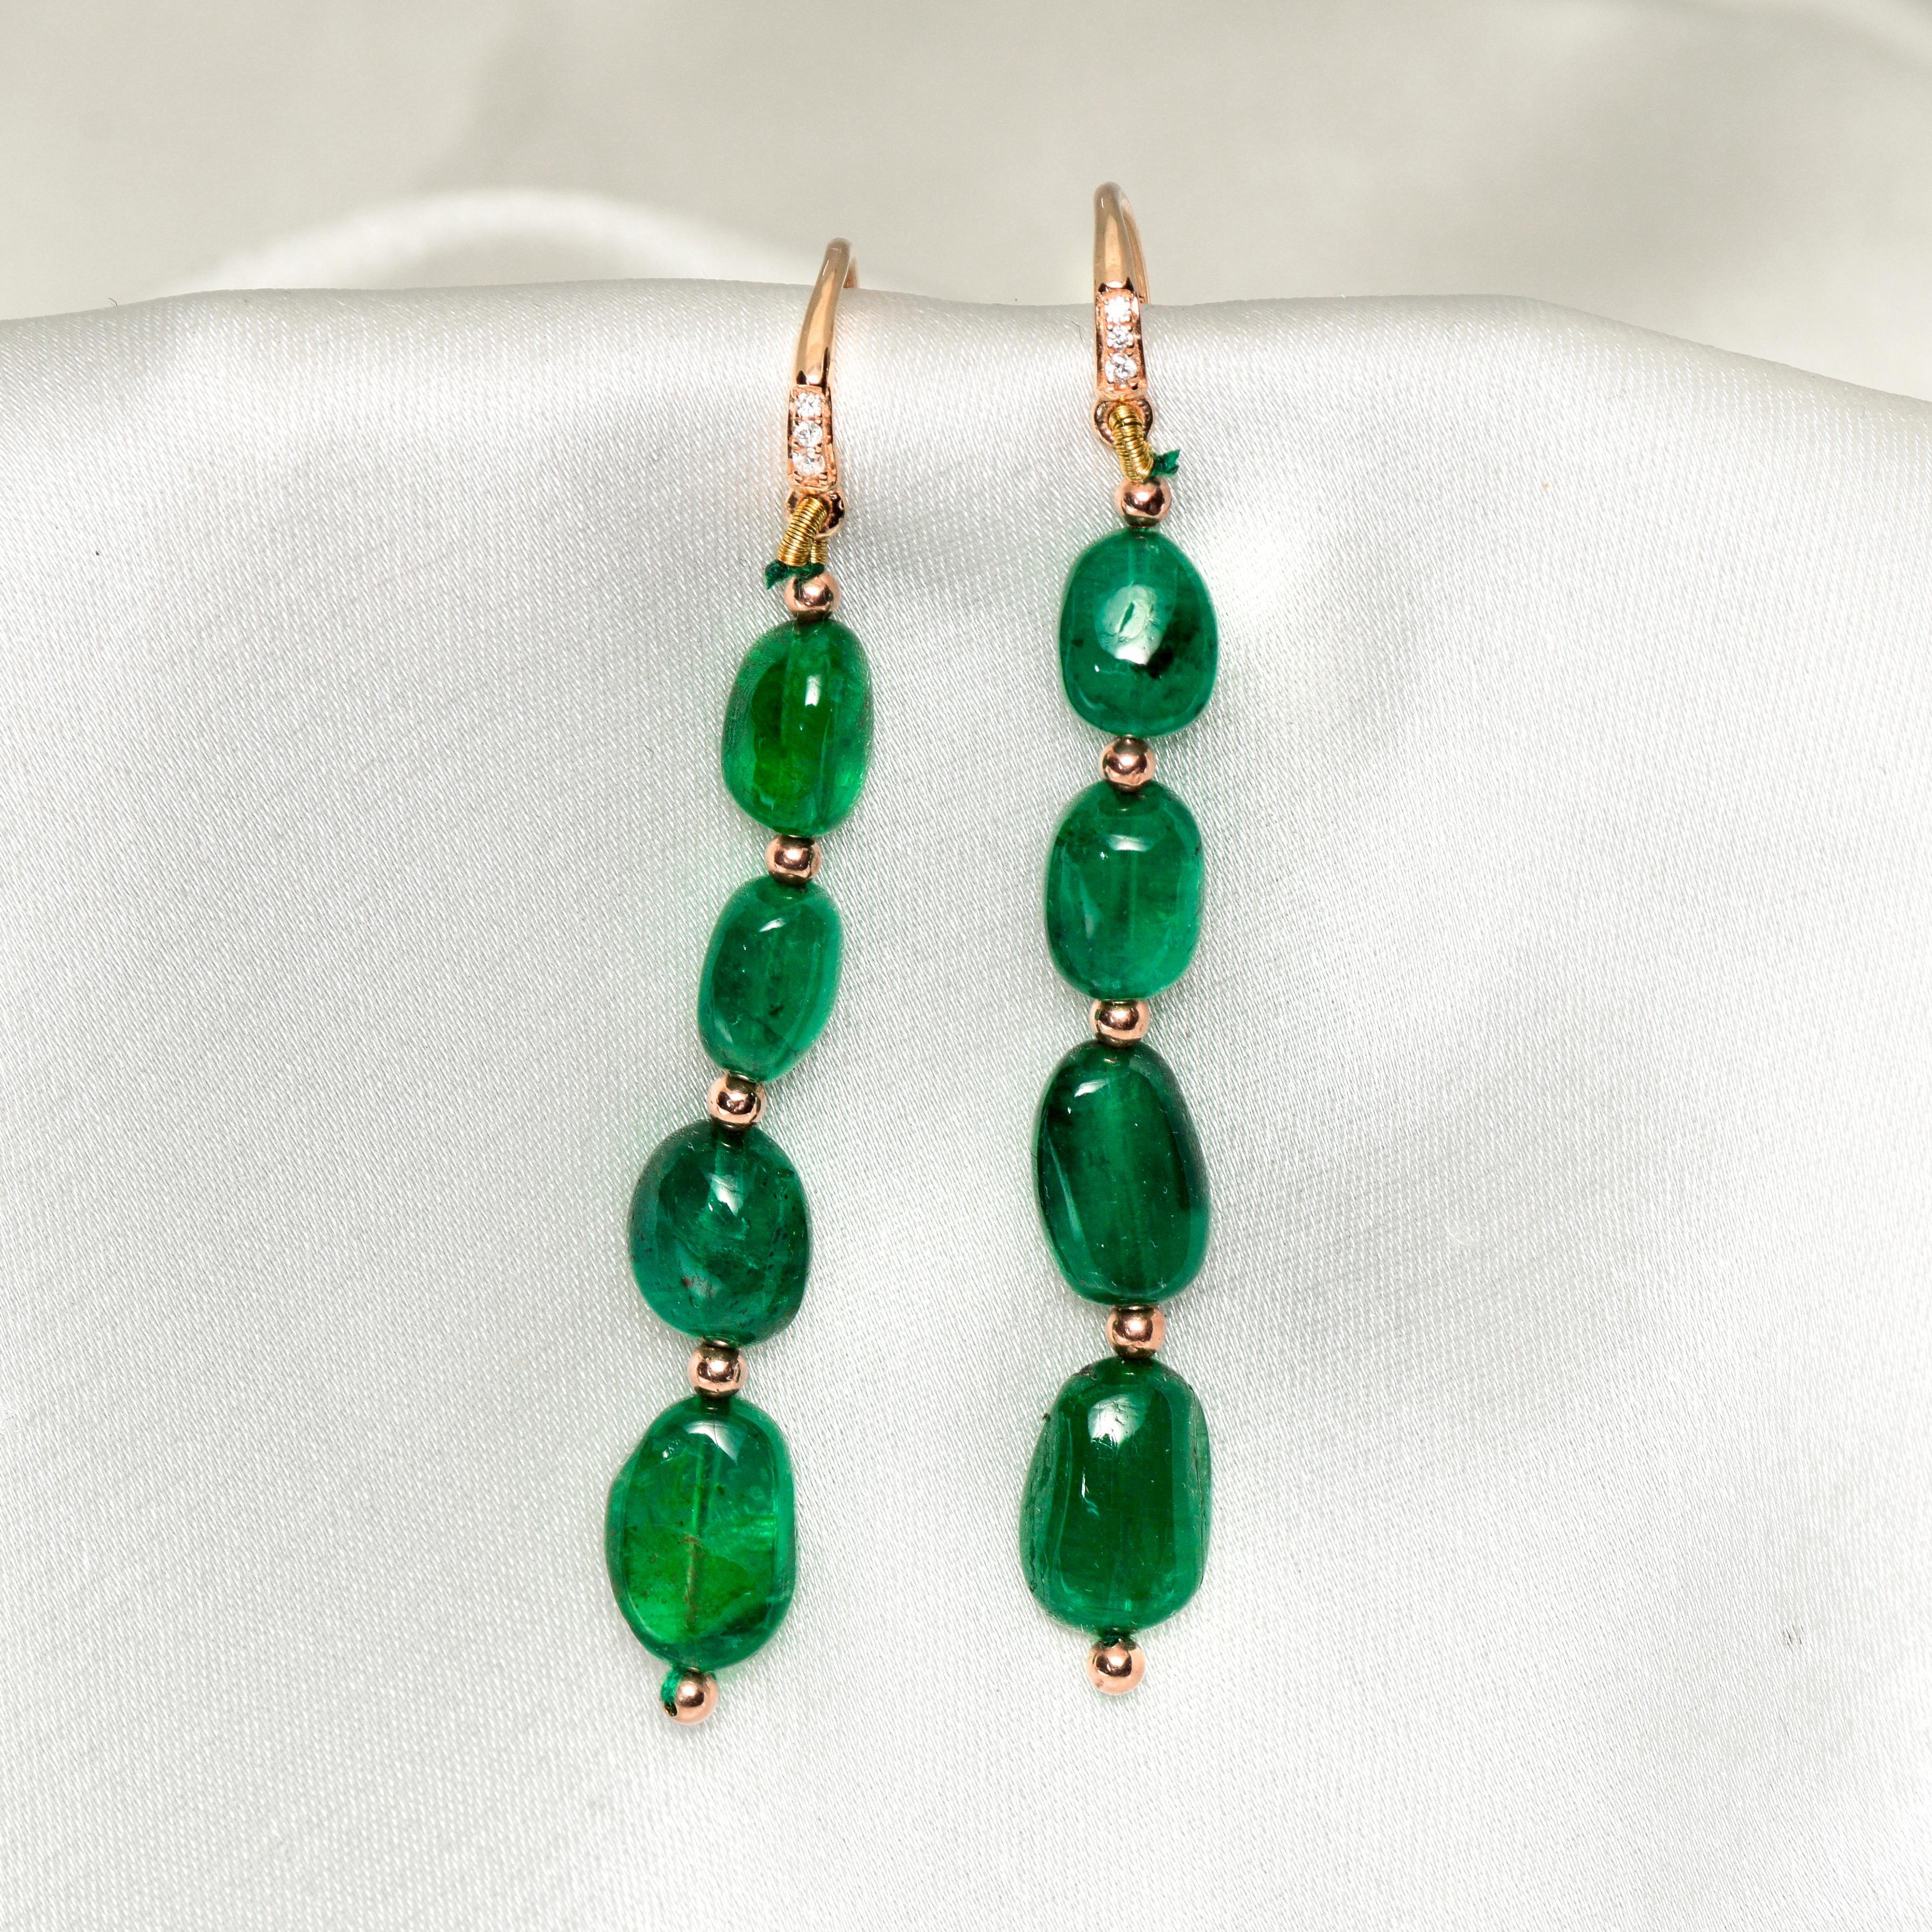 **One IGI 14K Rose Gold 20.10 Ct Emerald&Diamonds Antique Art Deco Style Hook Earrings **

Pairs of IGI-Certified natural green Emerald as the center stone weighing 20.10 ct set with the FG VS accent diamonds weighing 0.04 ct on the 14K white gold